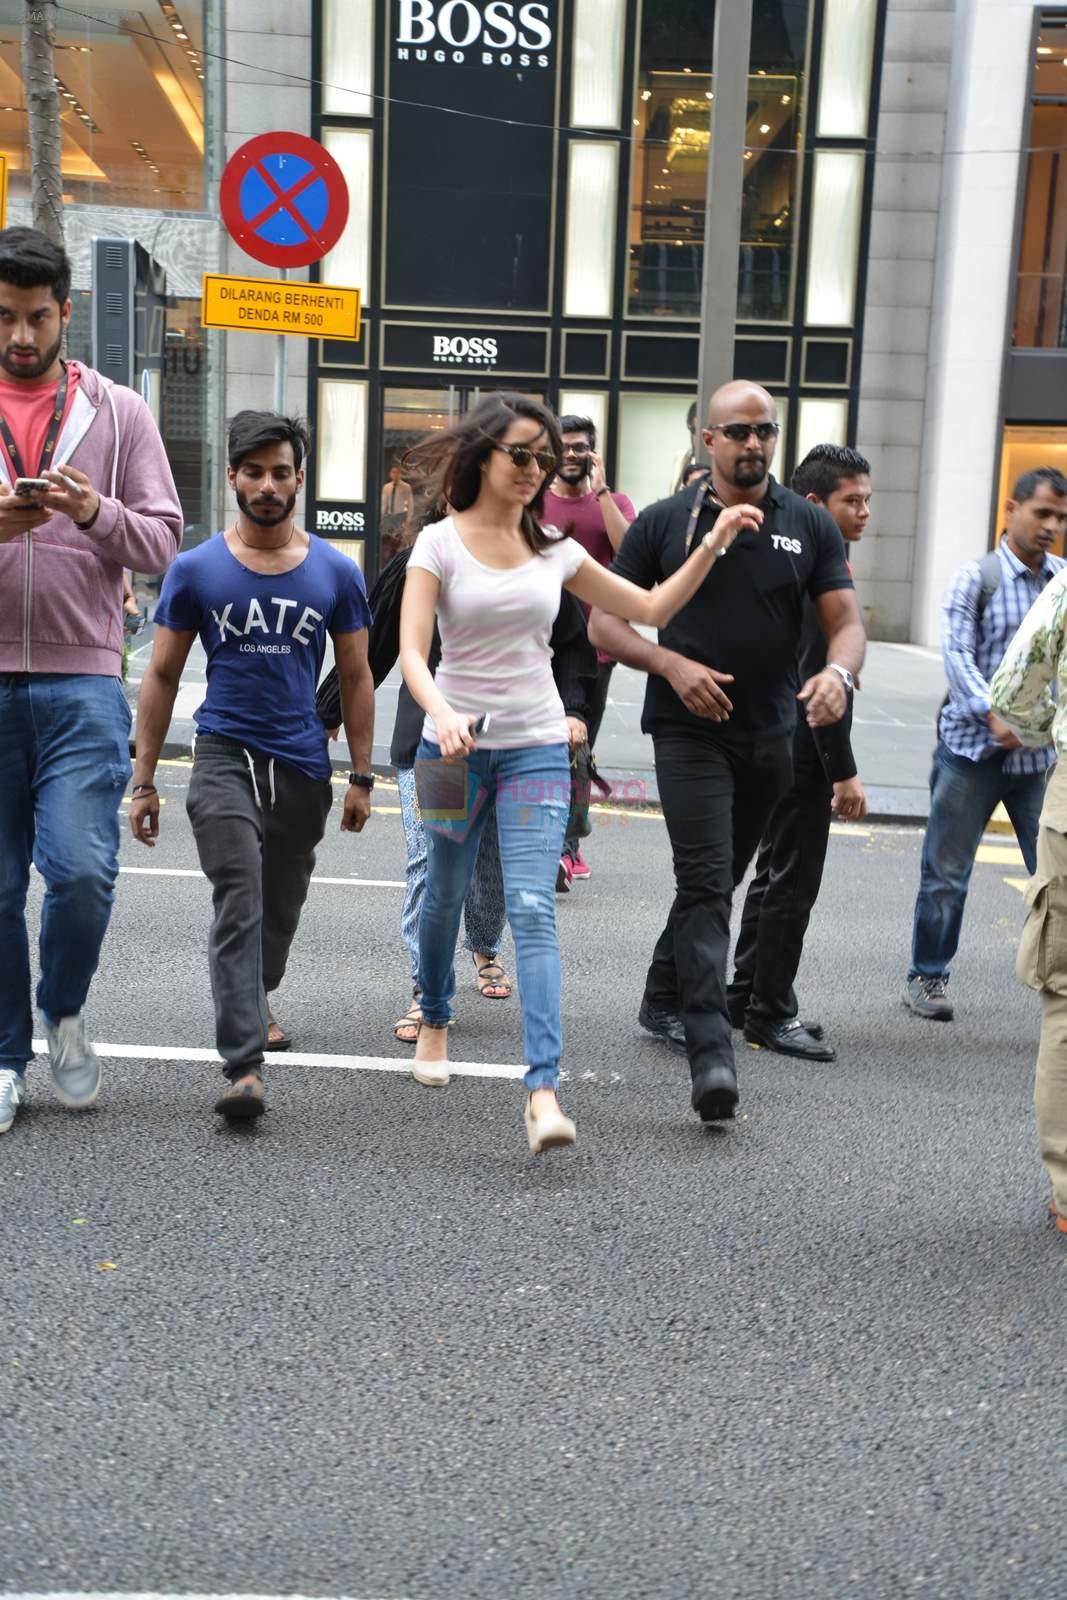 Shraddha Kapoor almost stopped traffic as she stops cars passing while she crosses in KL, Malaysia on 11th June 2015